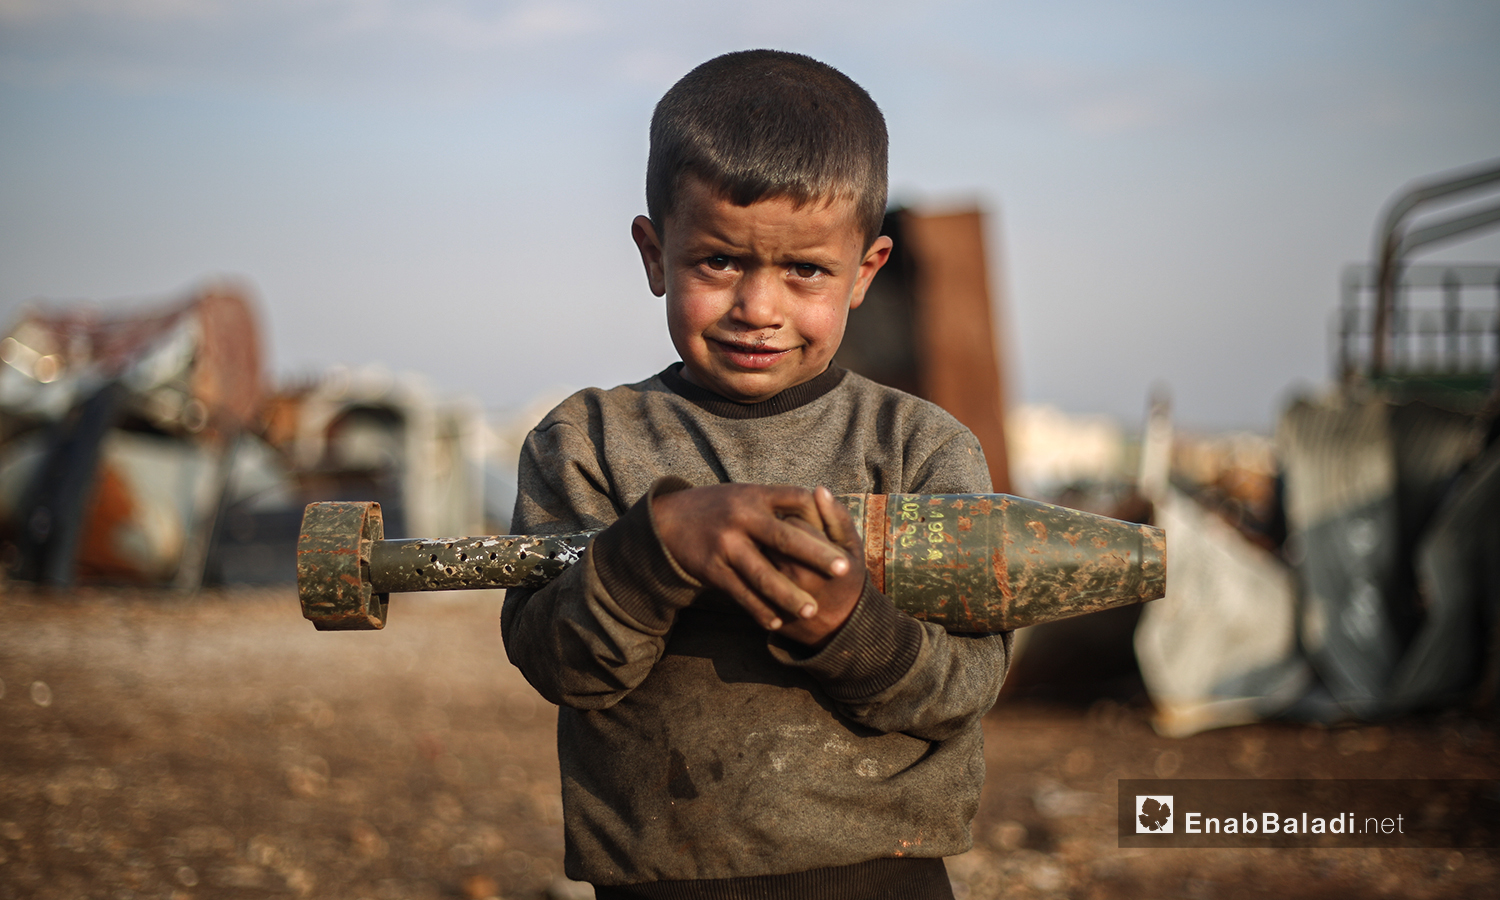 The child carries an unexploded artillery shell in the recyclable rocket collection yard in the northern countryside of Idlib.  He works with his family to secure their livelihood from the killing tool that caused the death of tens of thousands of children during Syria’s ten years of war - 5 March 2021 (Enab Baladi / Youssef Gharibi)